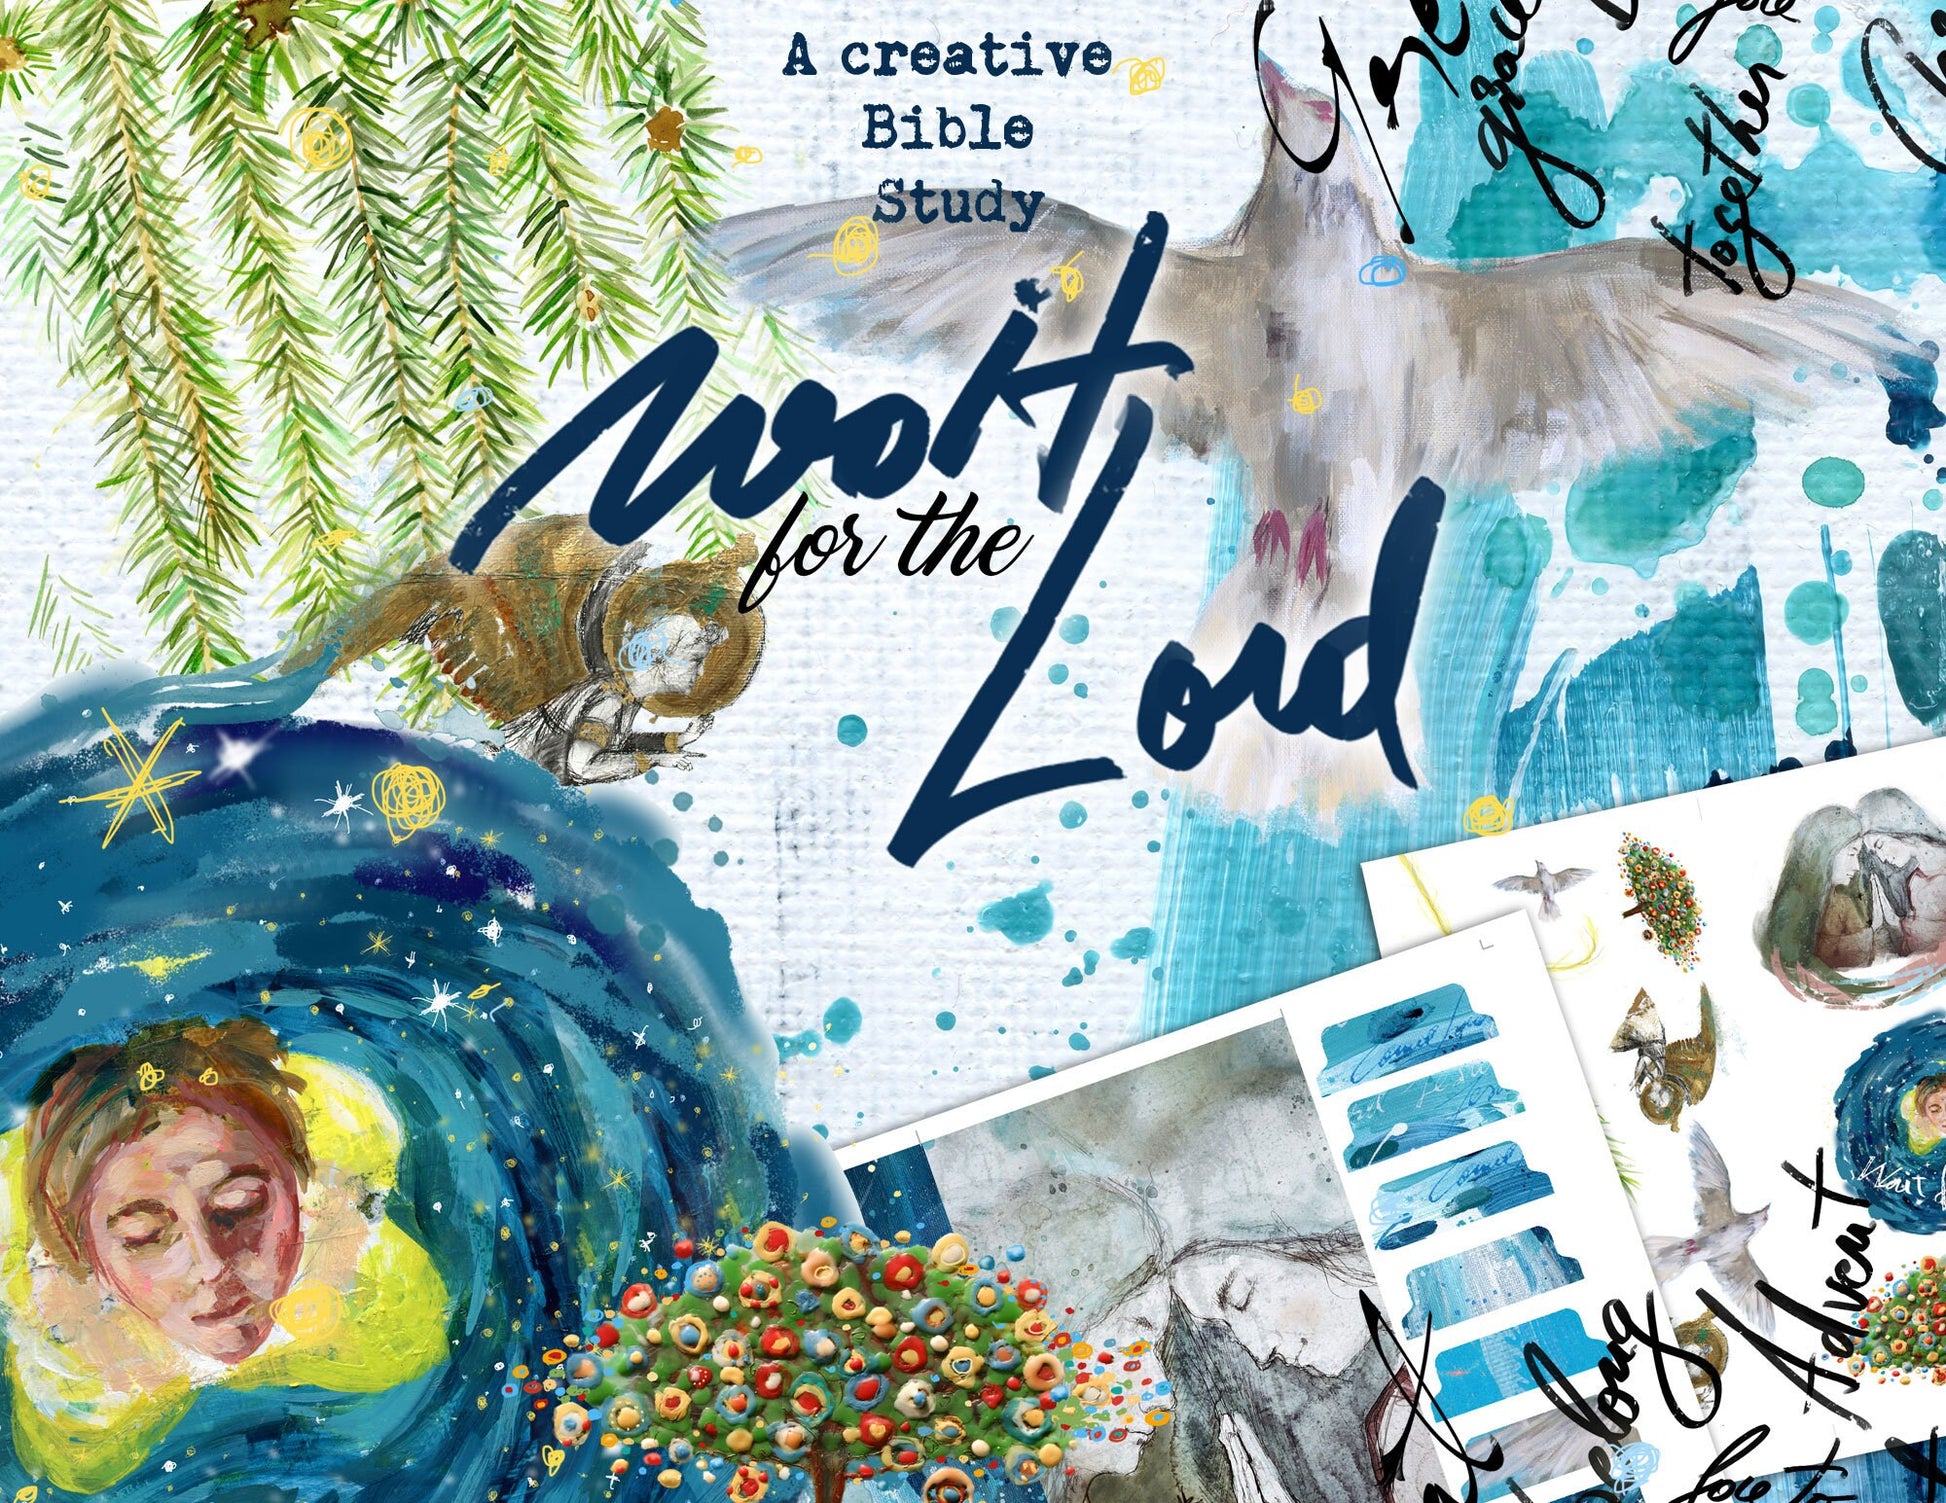 Wait for the Lord- an Advent creative bible study - digital download